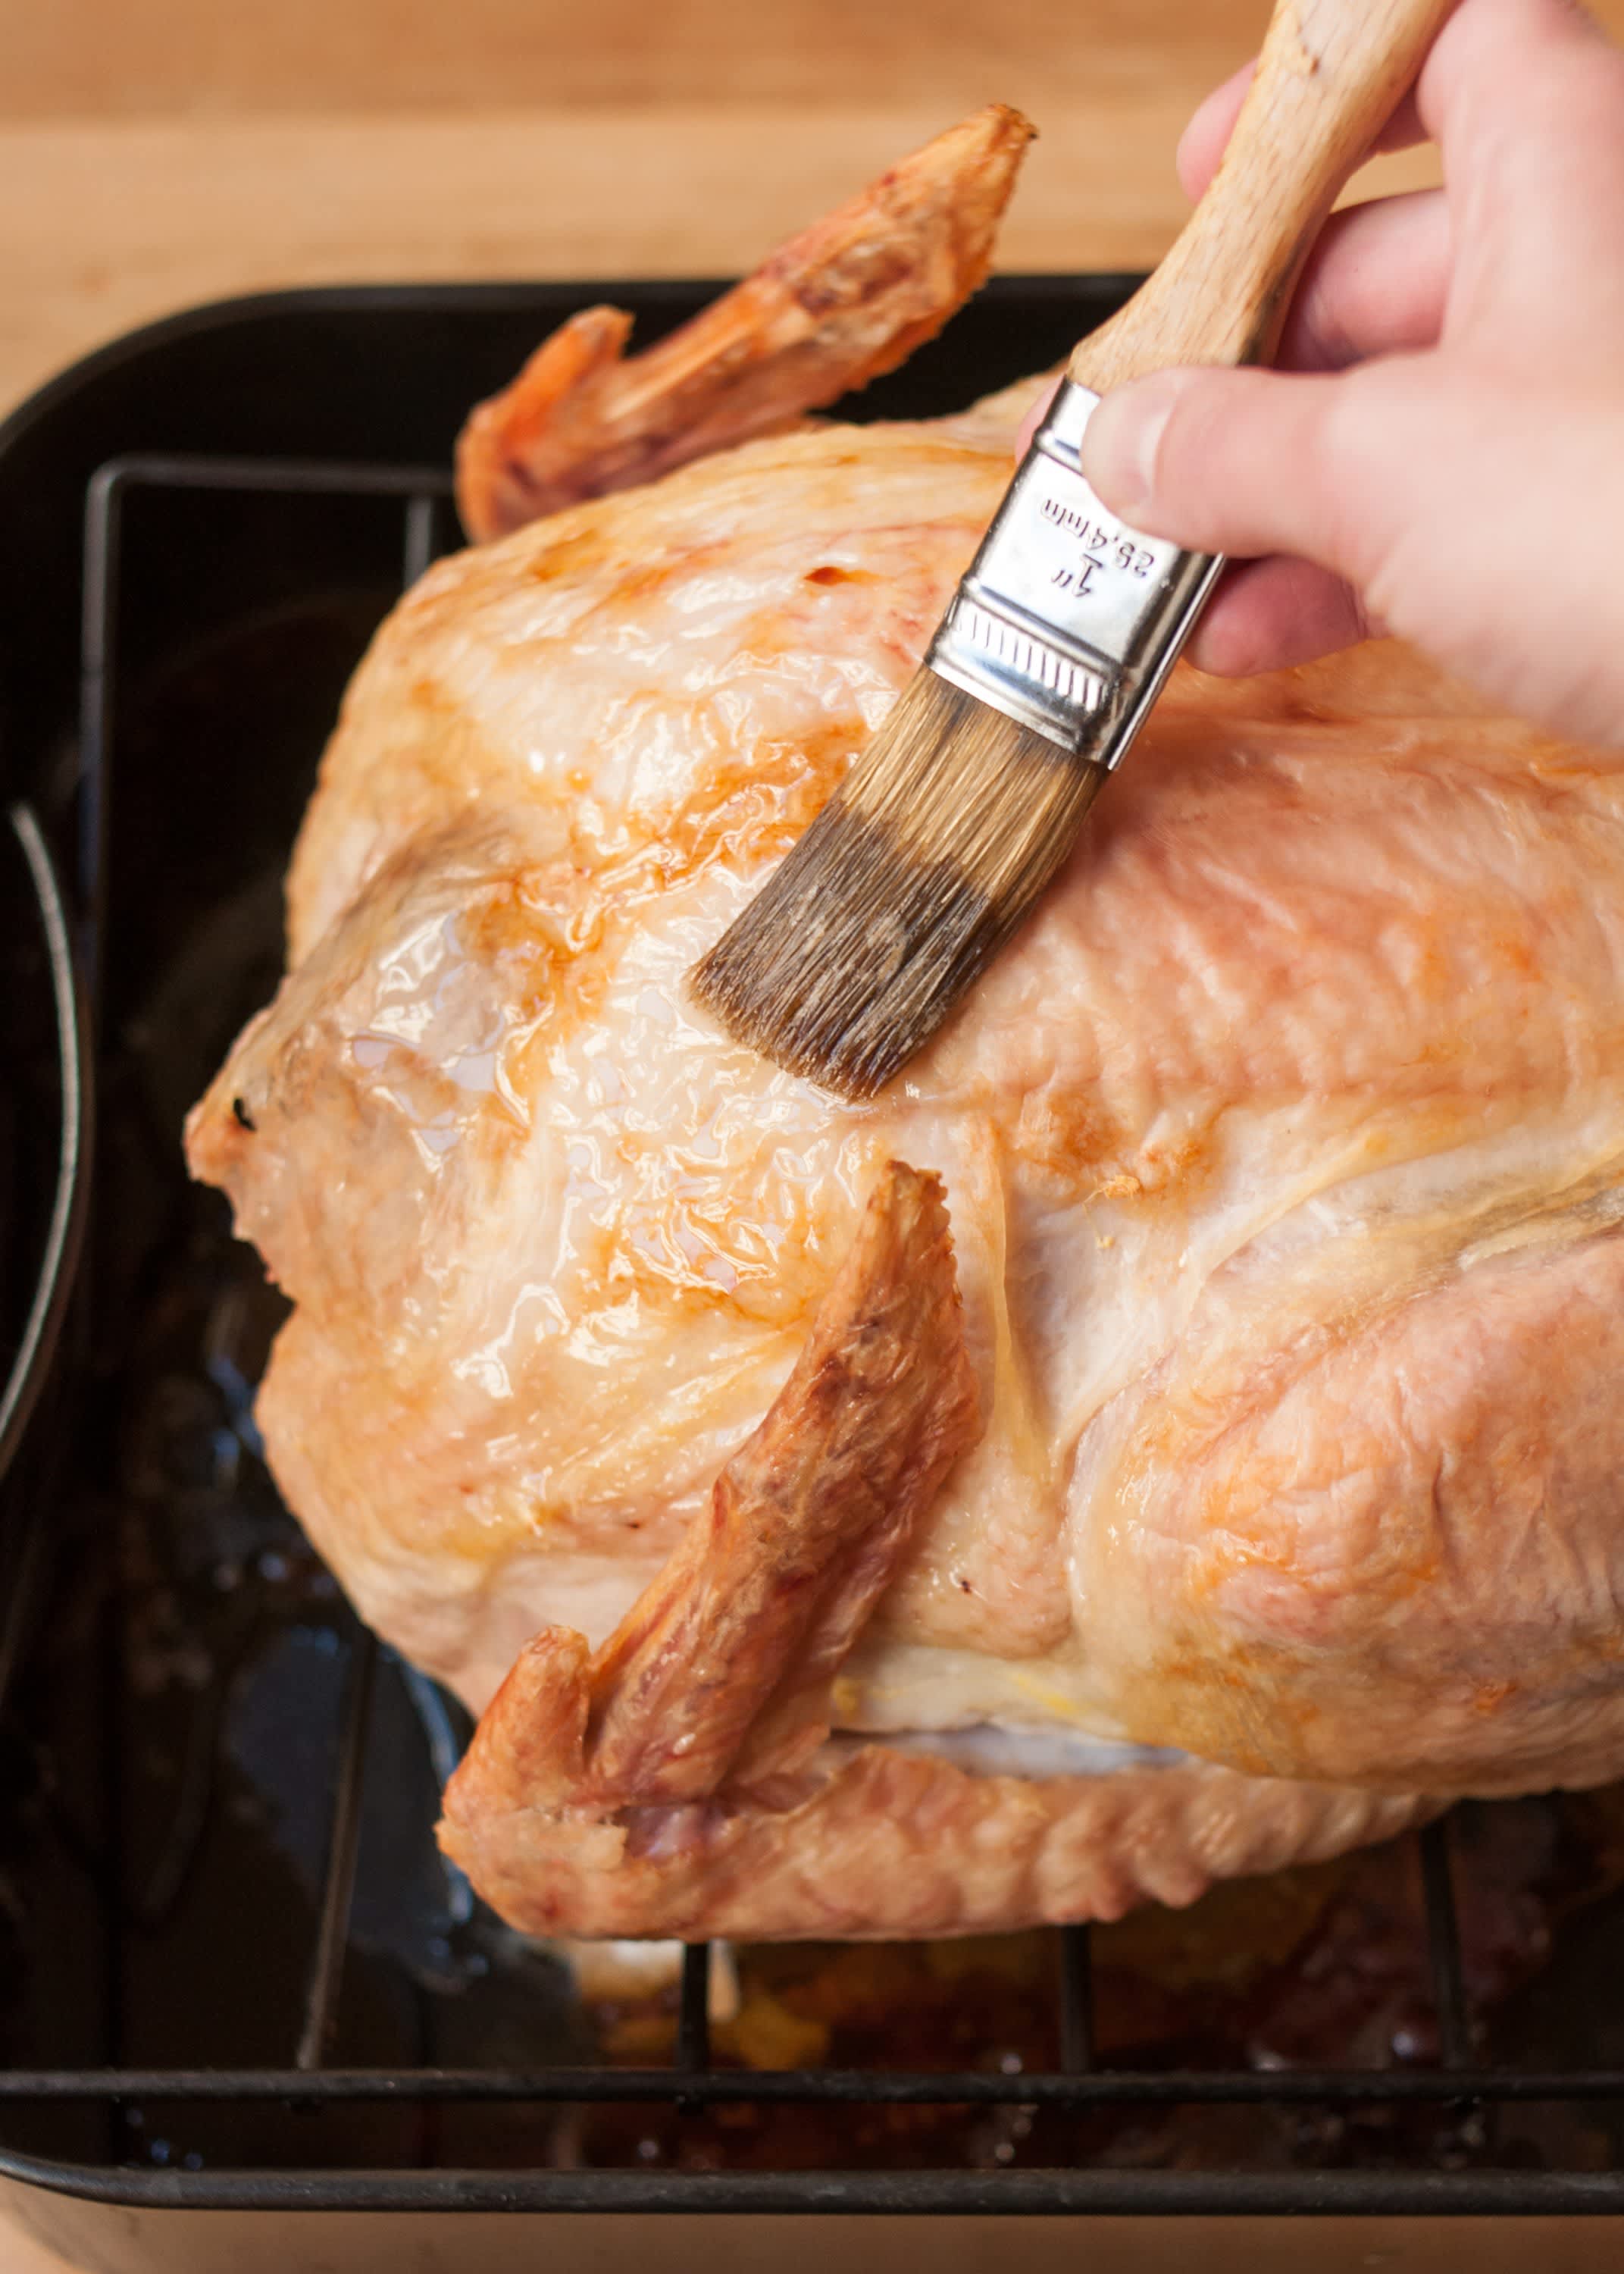 How to cook turkey from frozen